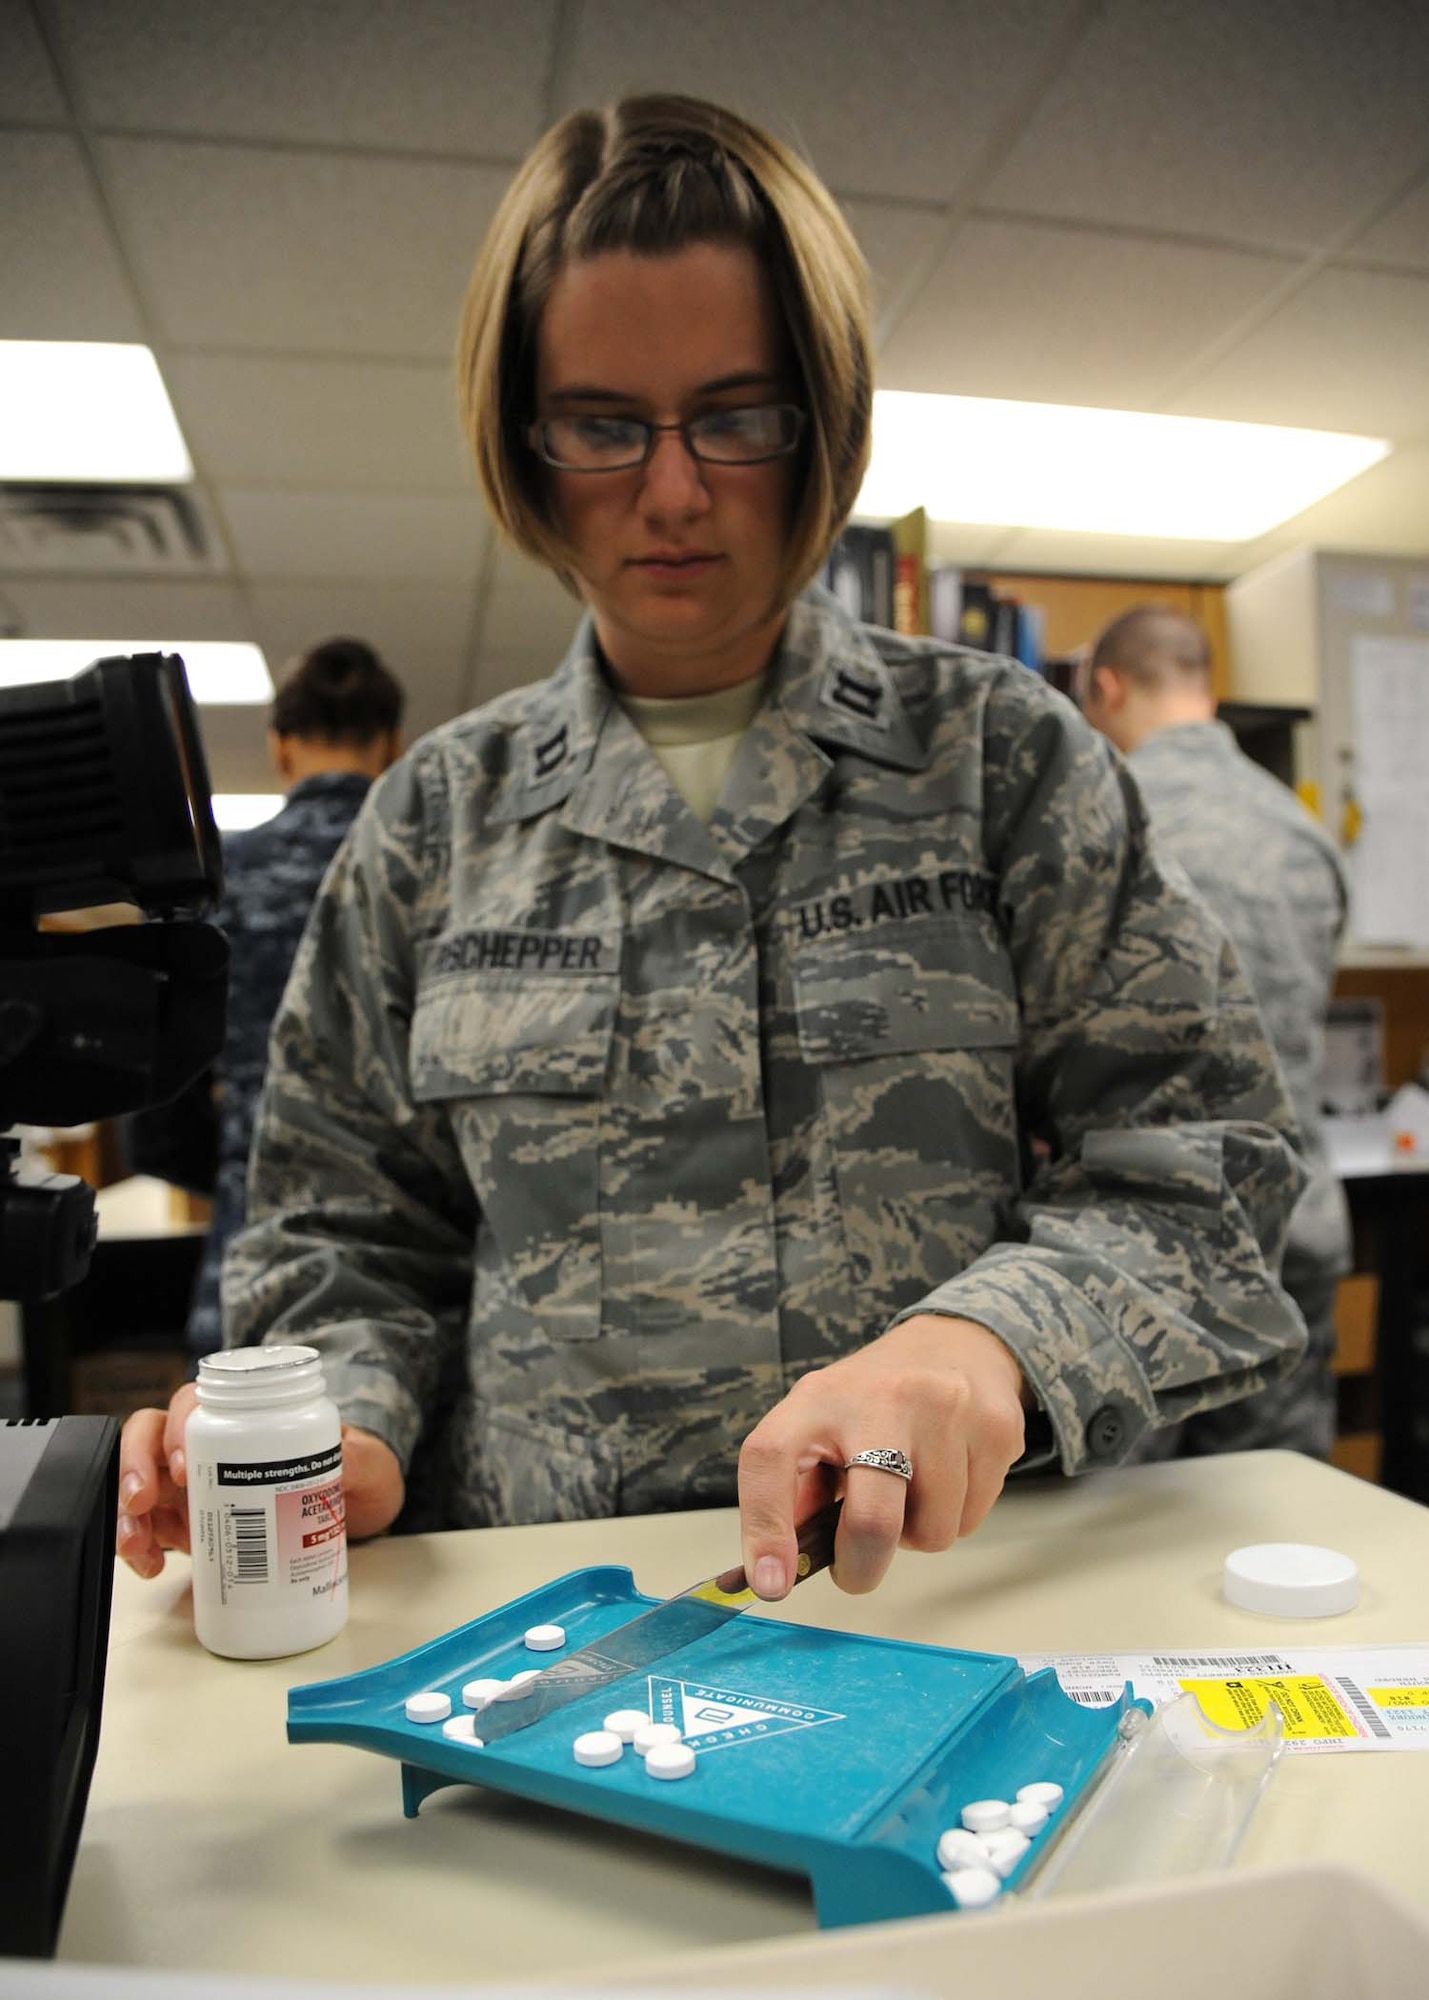 U.S. Air Force Capt. Nicole Deschepper, a 59th Patient Squadron pharmacist, counts pills while filling prescriptions for military members at Reid Clinic on Joint Base San Antonio, Texas, Feb. 16.  Pharmacists are a part of the Biomedical Science Corps (BSC) along with 16 other medical career fields. BSC Appreciation week is recognized in the month of March. (U.S. Air Force photo/Staff Sgt. Kevin Iinuma)